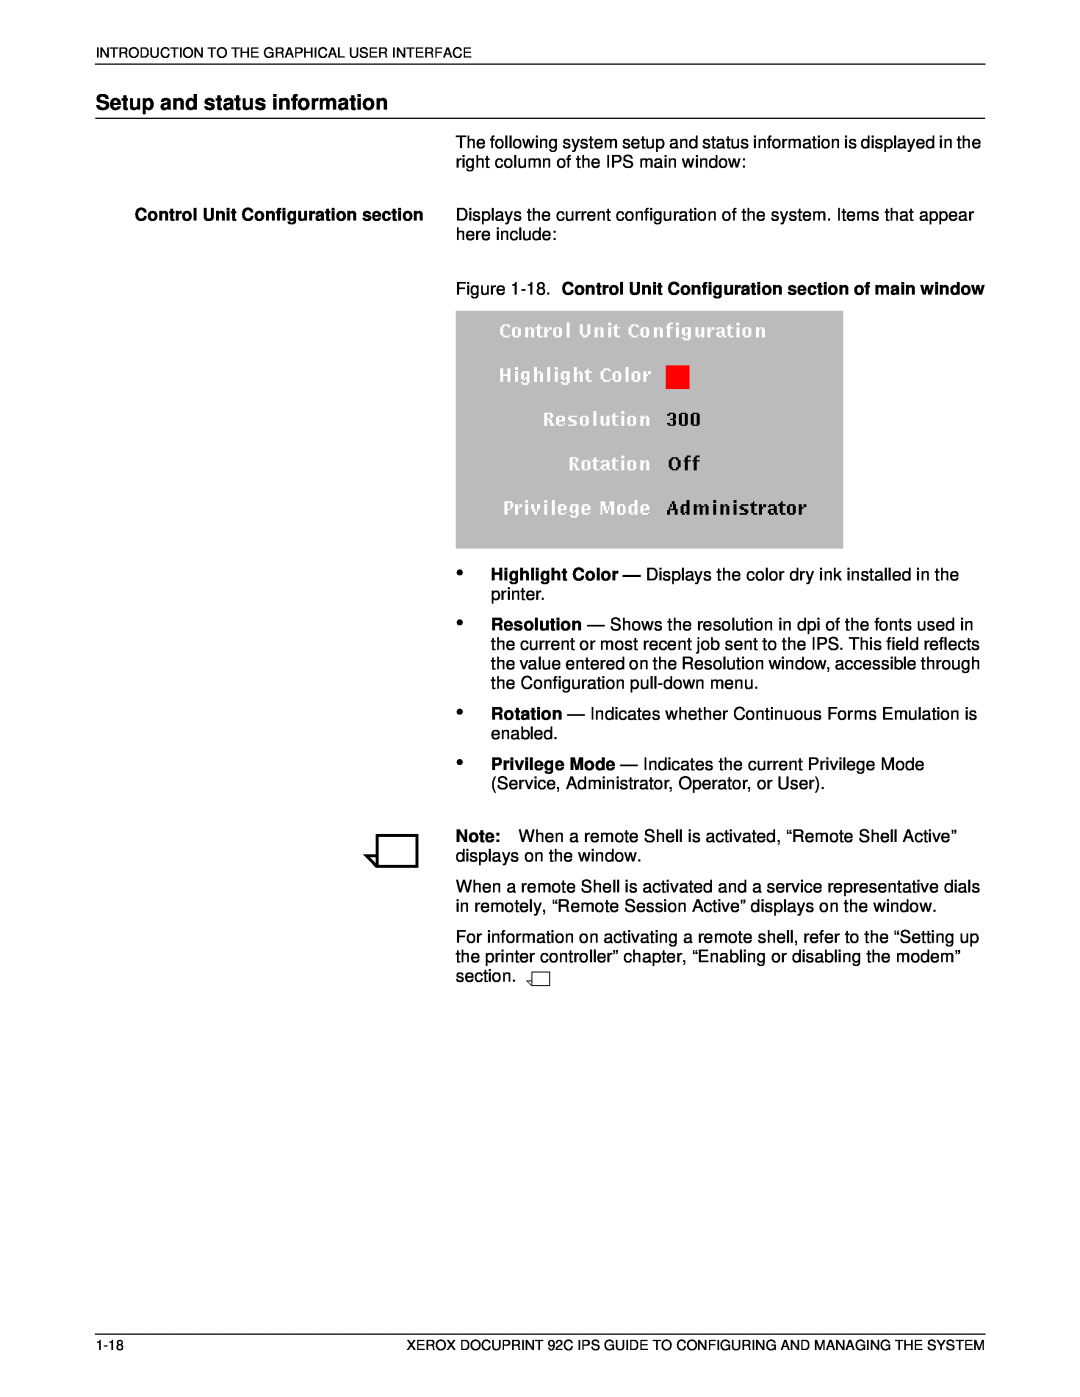 Xerox 92C IPS manual Setup and status information, 18. Control Unit Configuration section of main window 